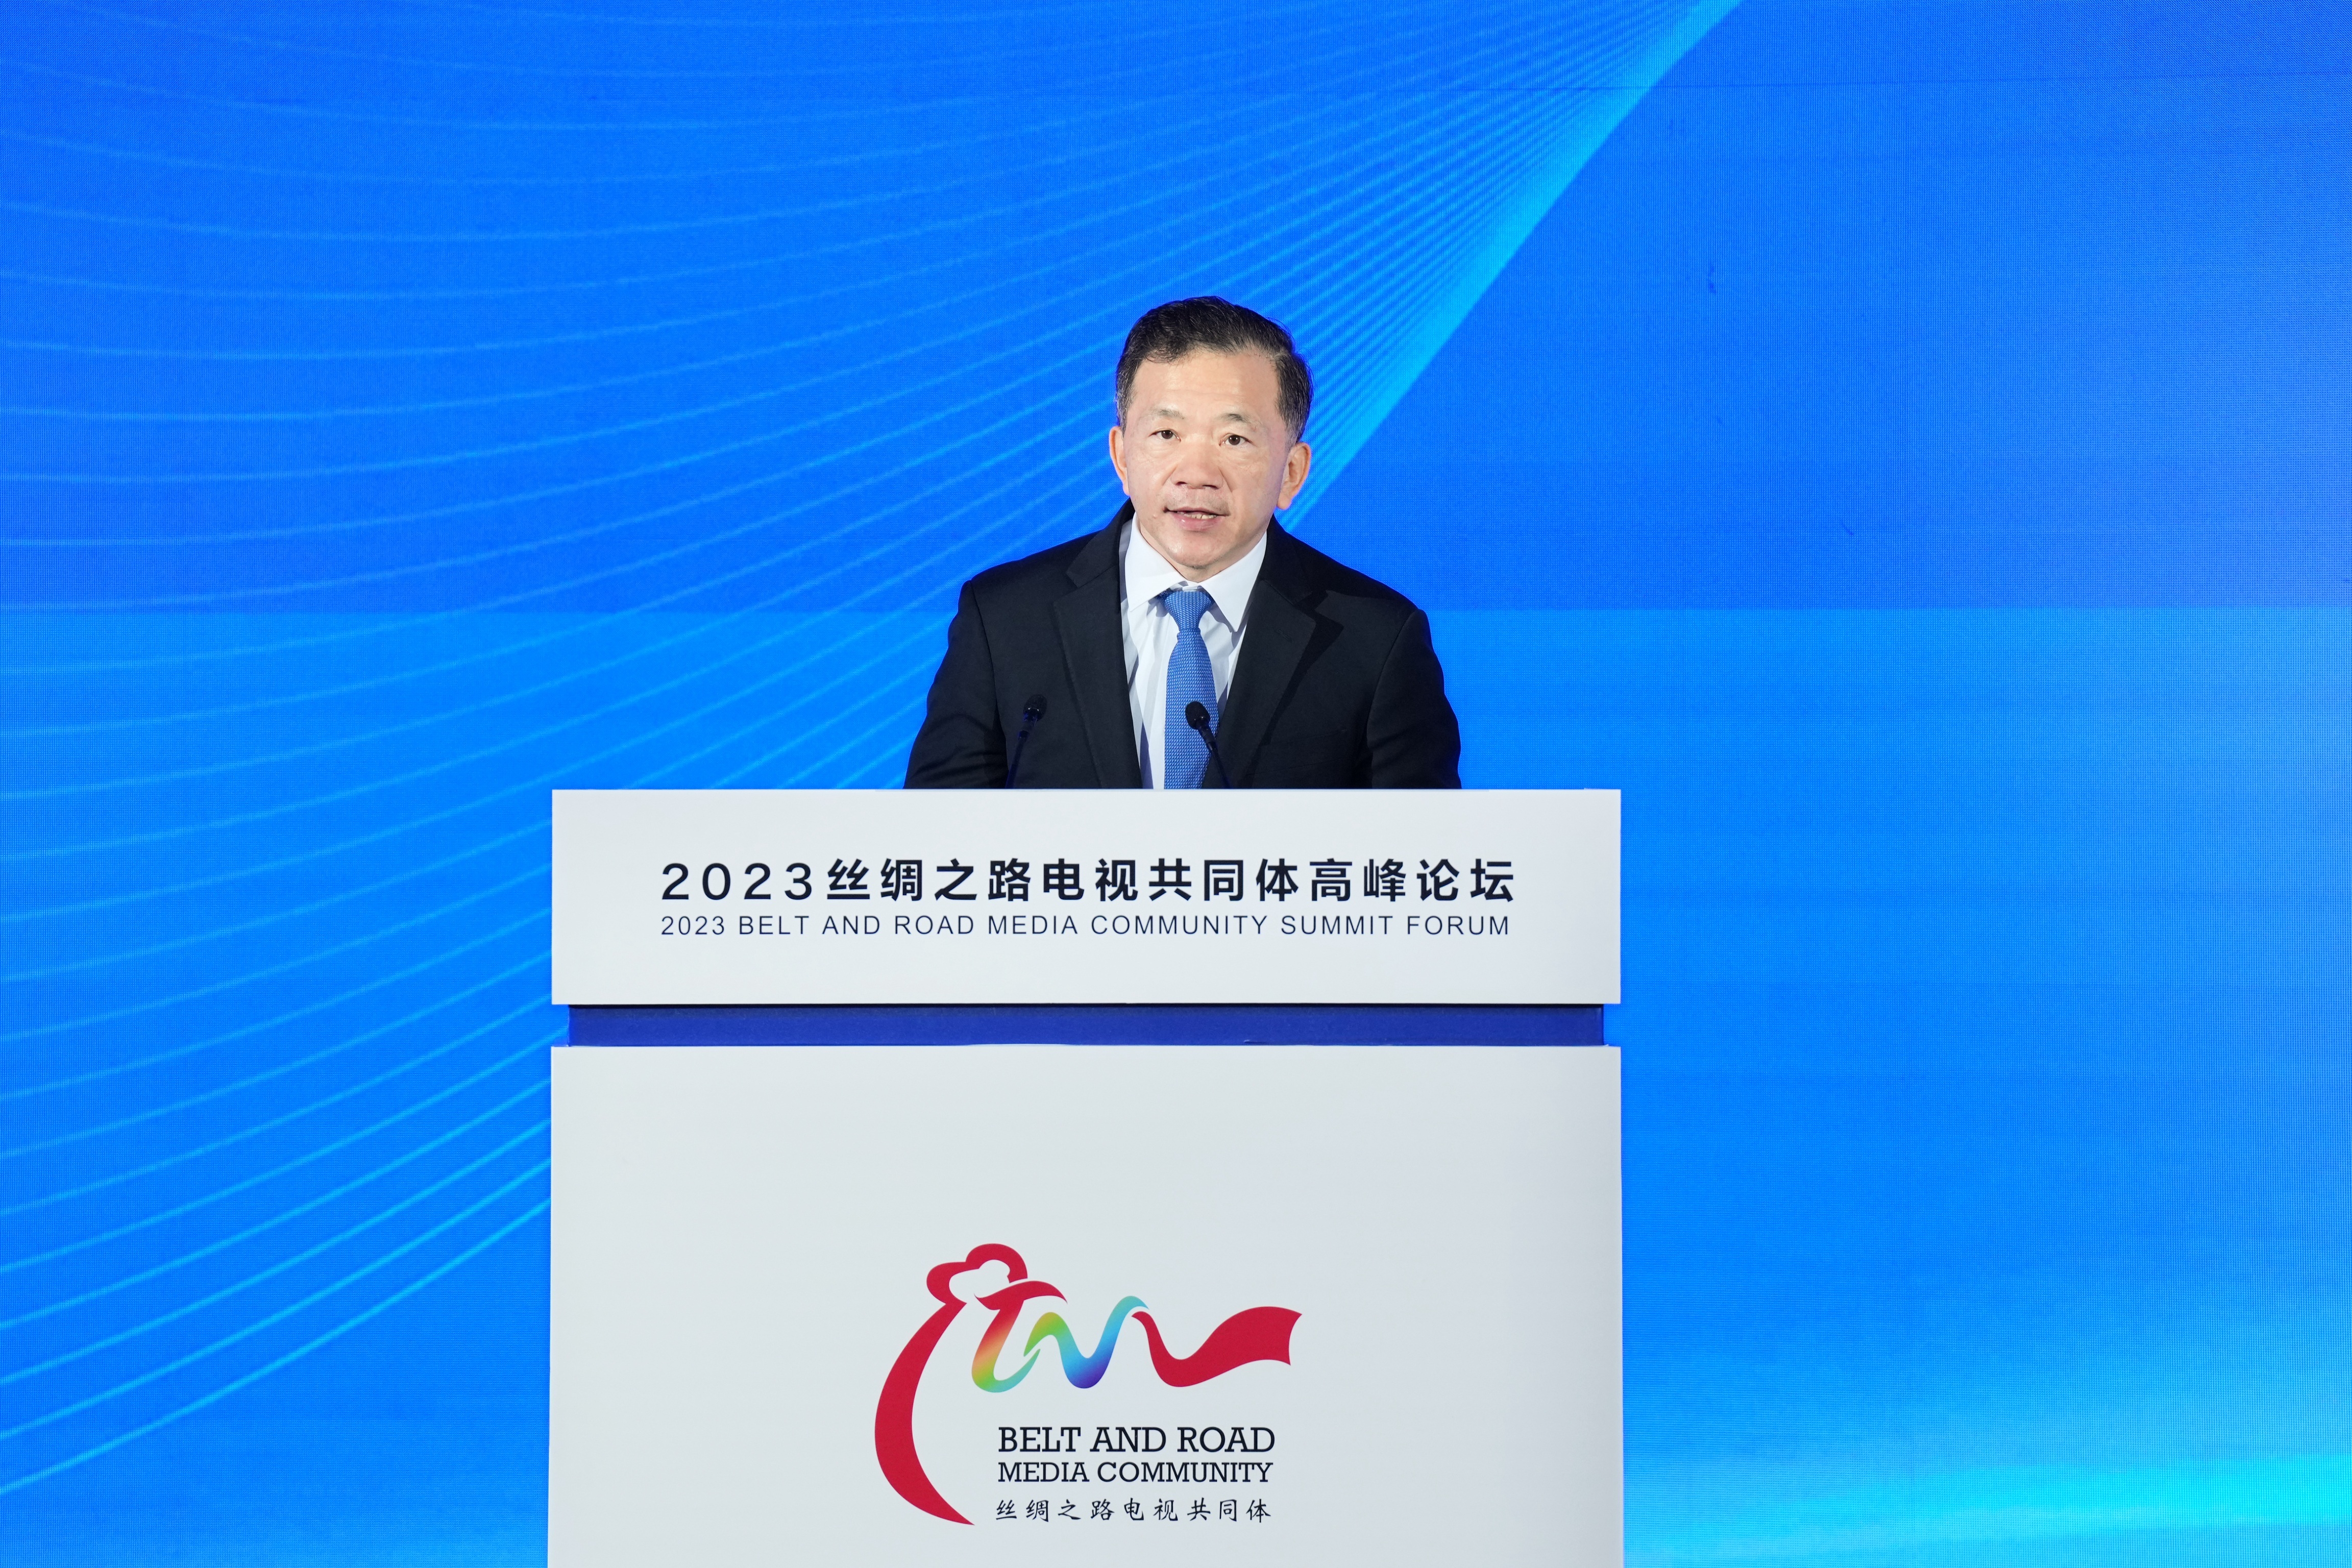 Shen Haixiong, the vice minister of the Publicity Department of the Communist Party of China (CPC) Central Committee and president of CMG delivers a speech at the 2023 Belt and Road Media Community Summit Forum in Beijing, on February 14, 2023. /CMG